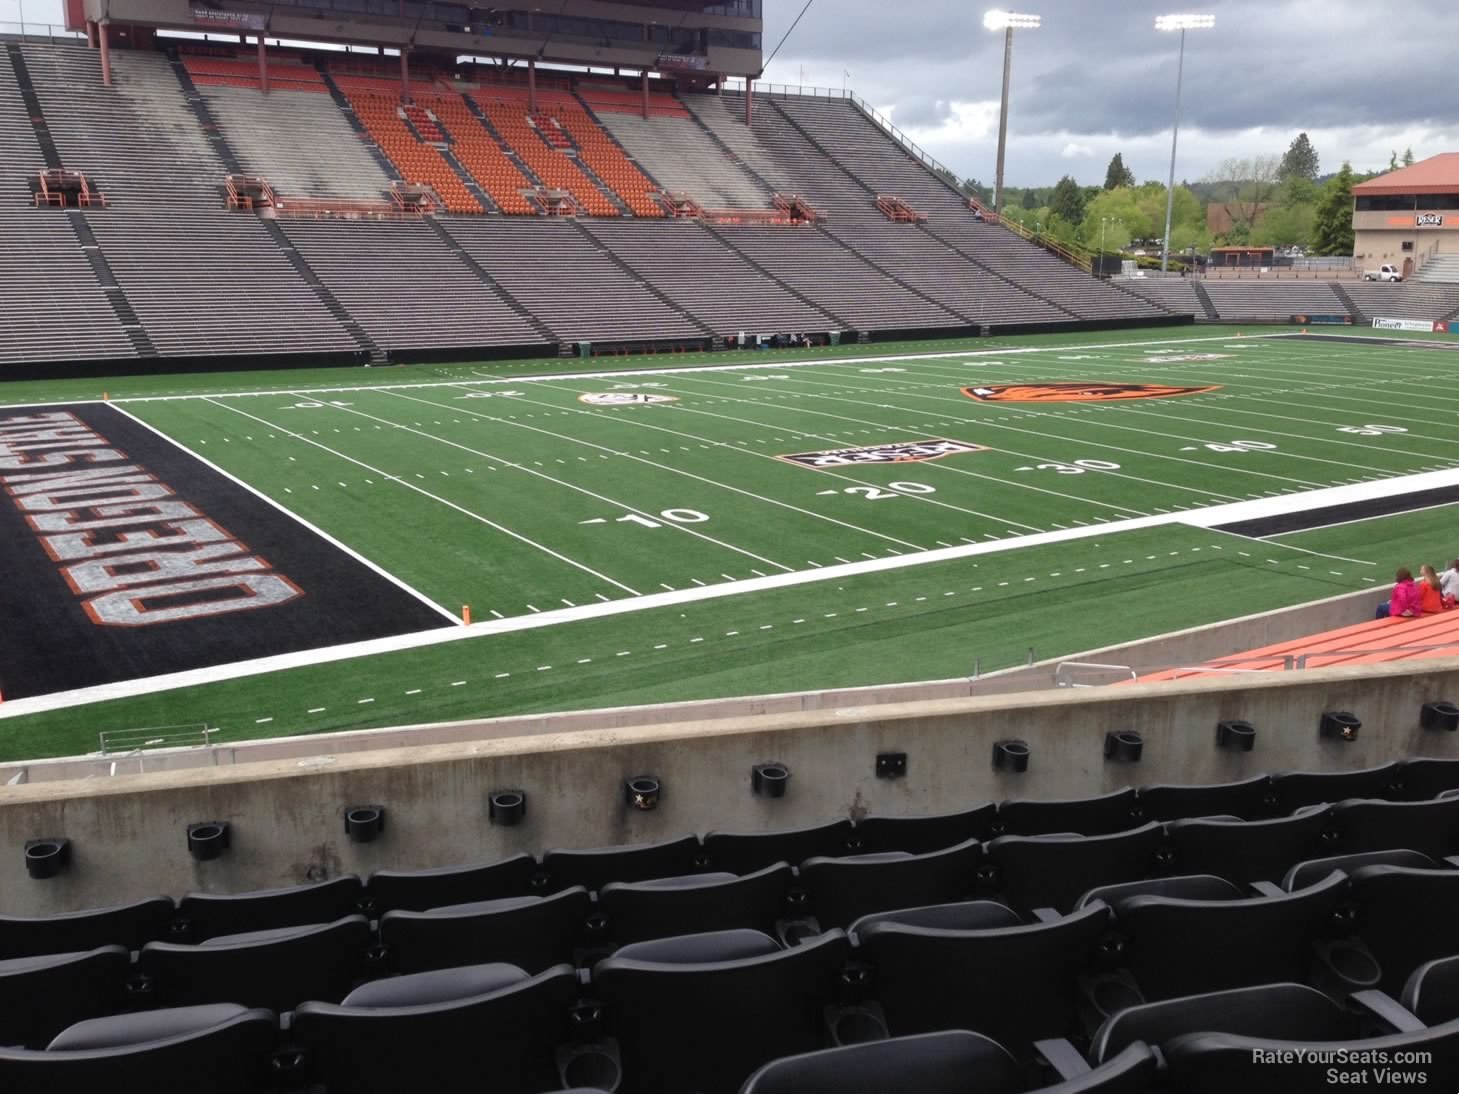 section 120, row 20 seat view  - reser stadium